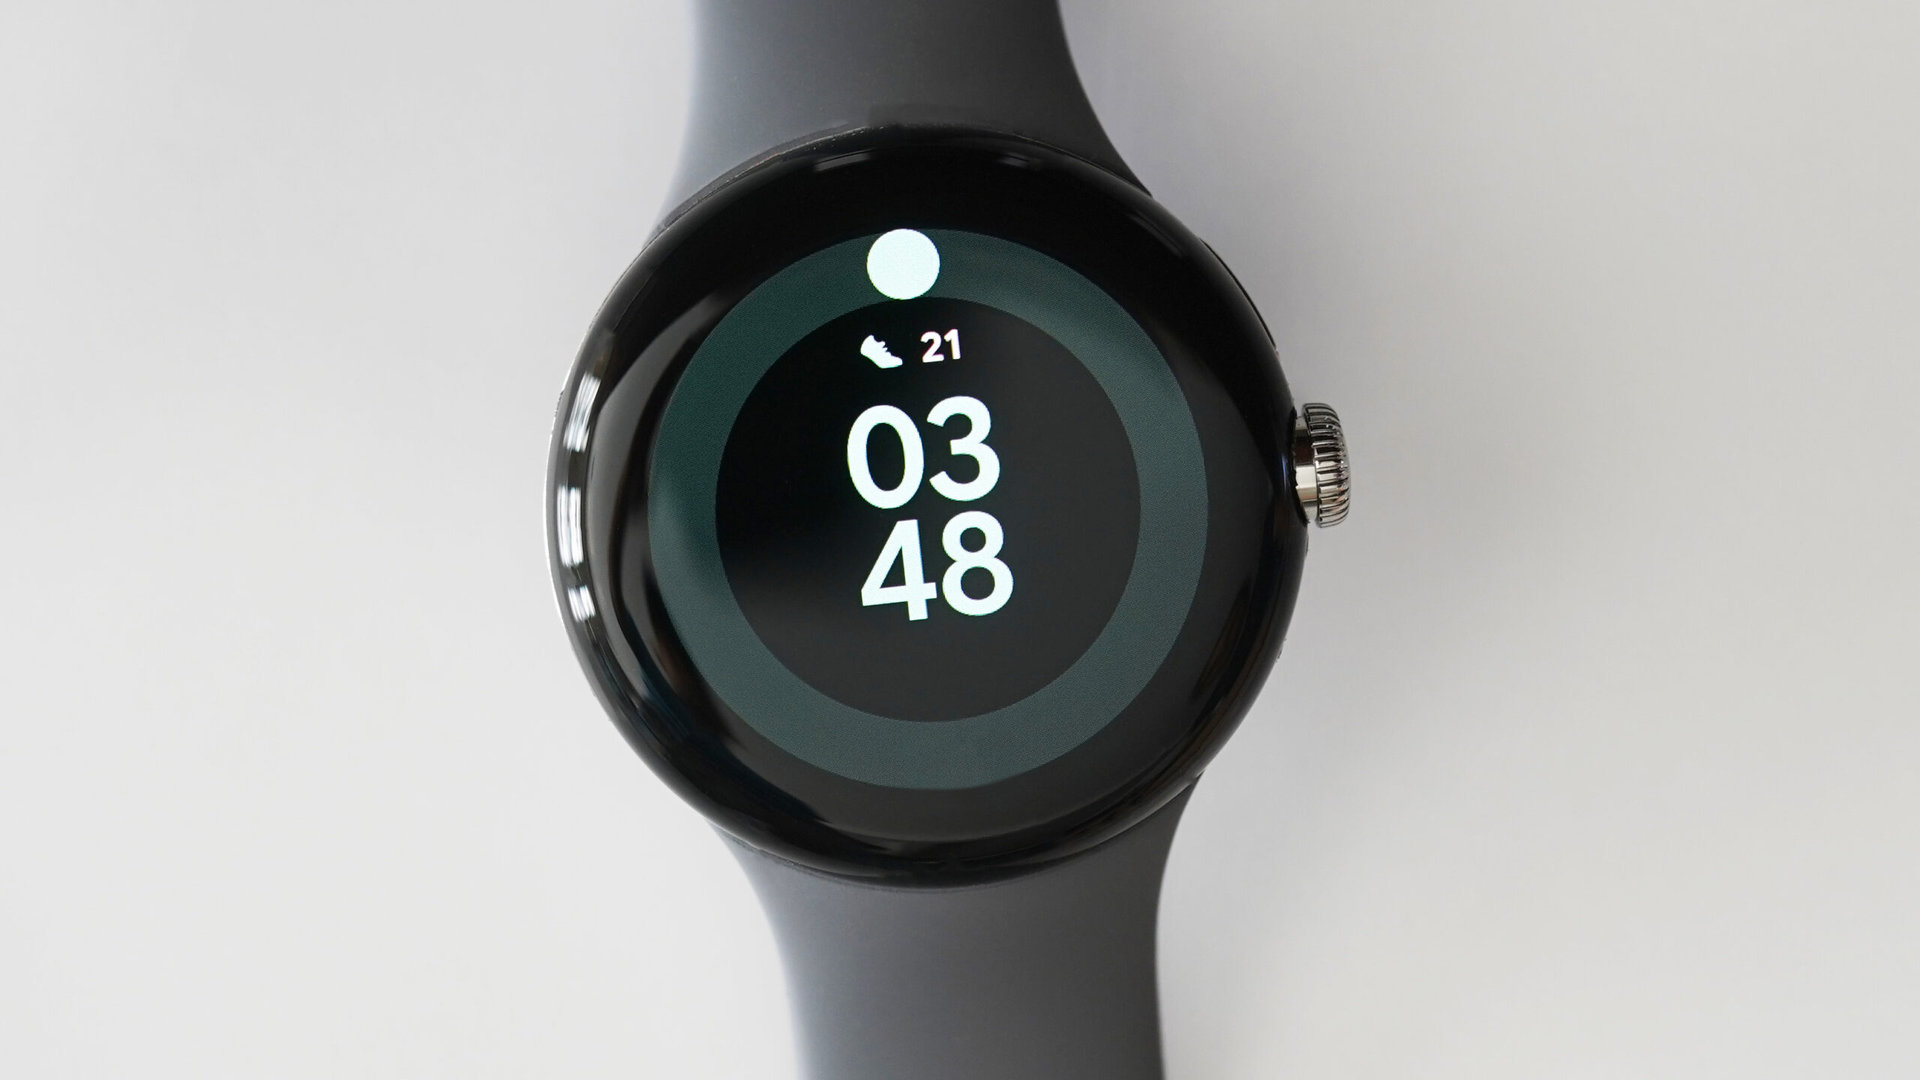 The Track watch face displays a users daily step count.